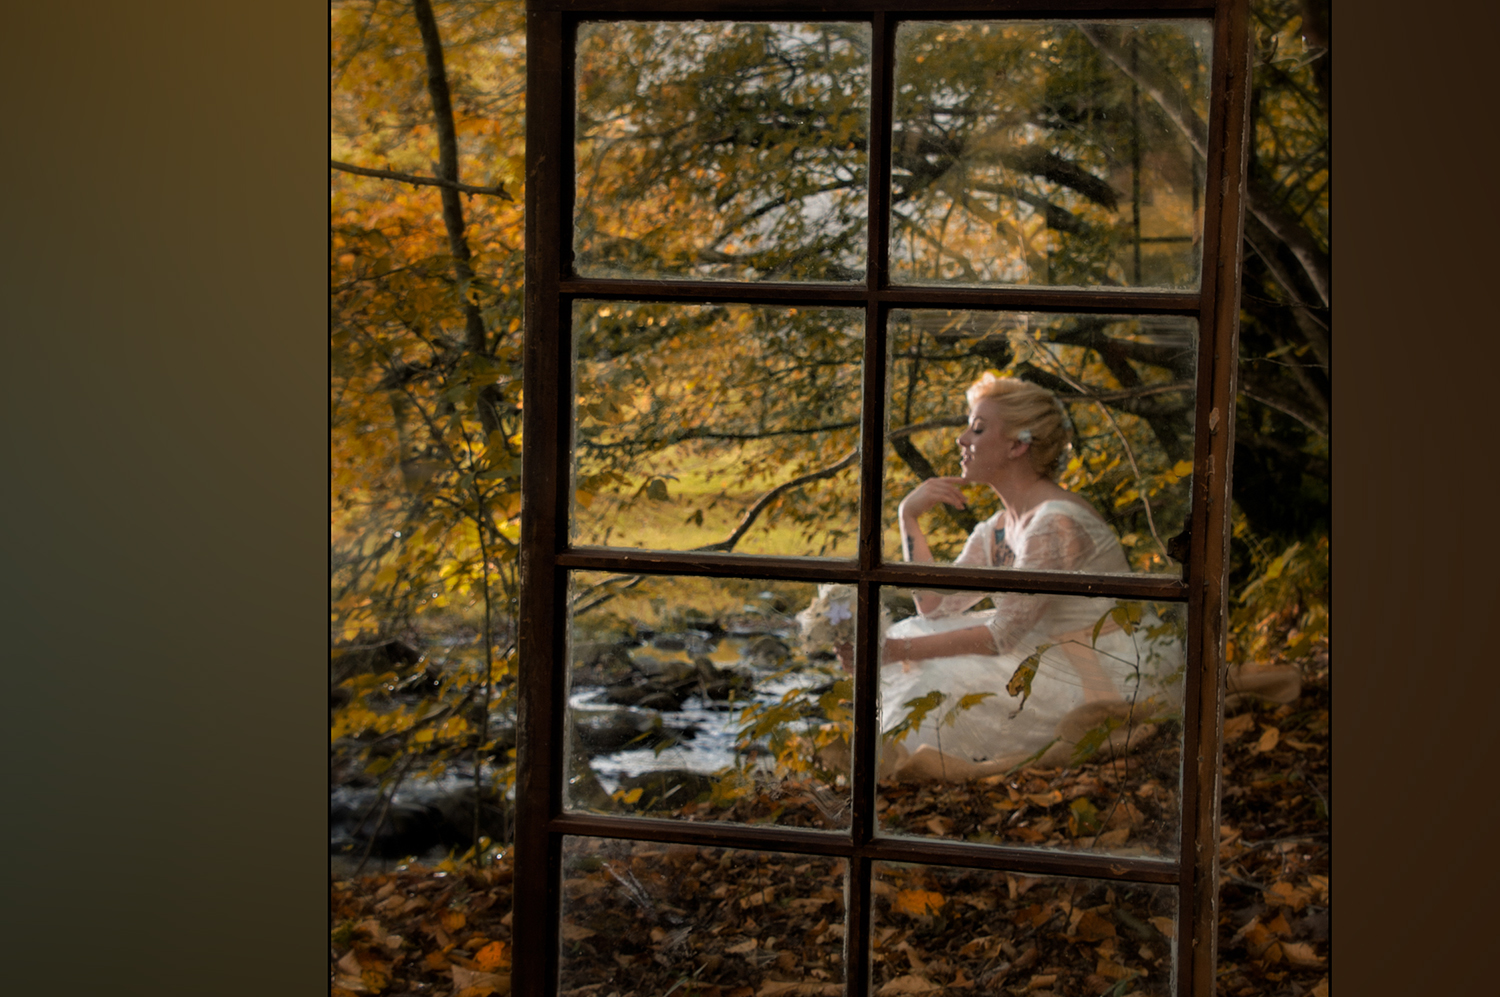 Bride posing in the fall by a creek behind an old window photography prop